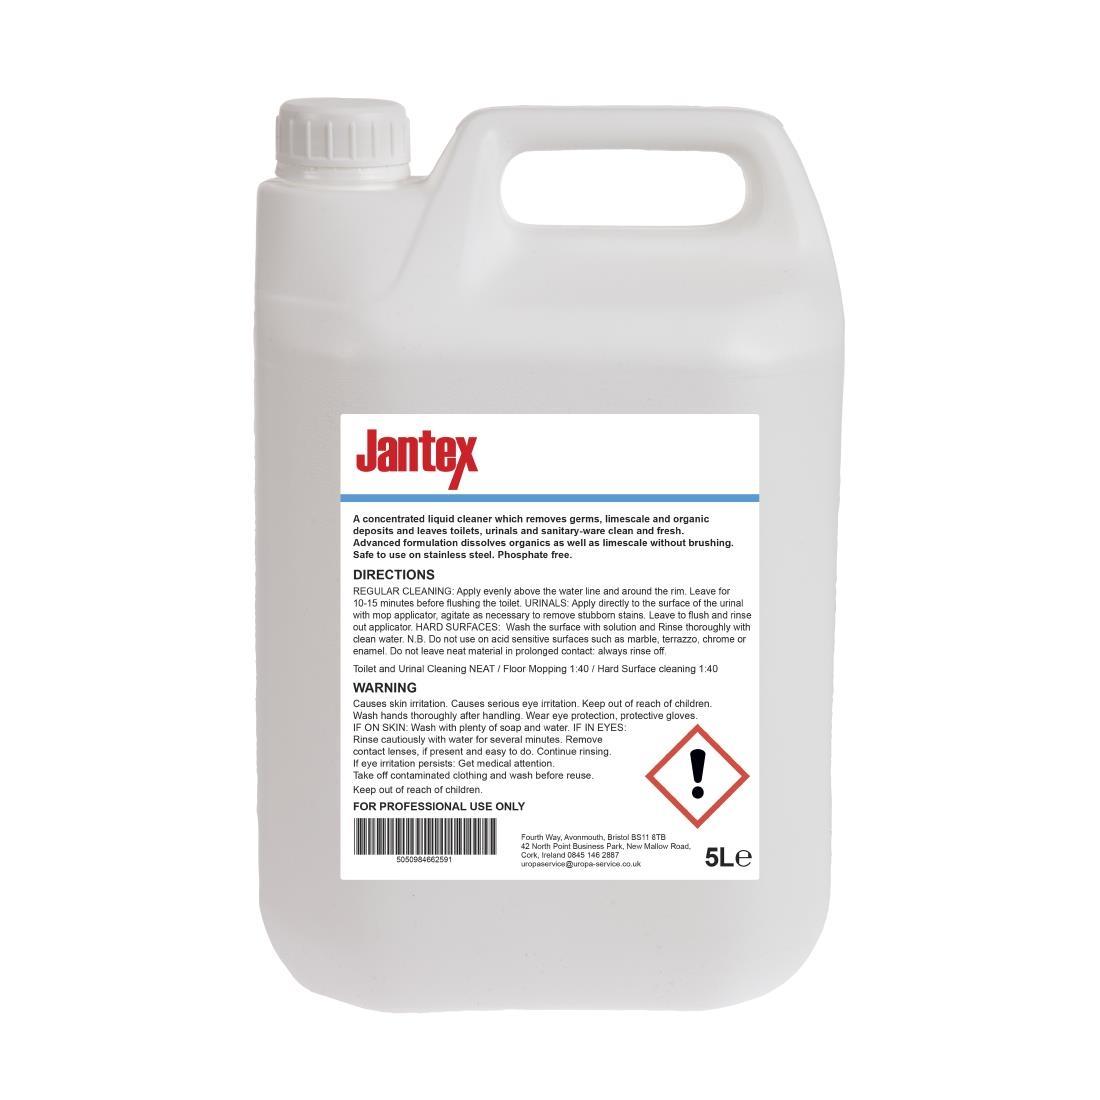 Jantex Toilet Cleaner Ready To Use 5Ltr - CF983  - 2